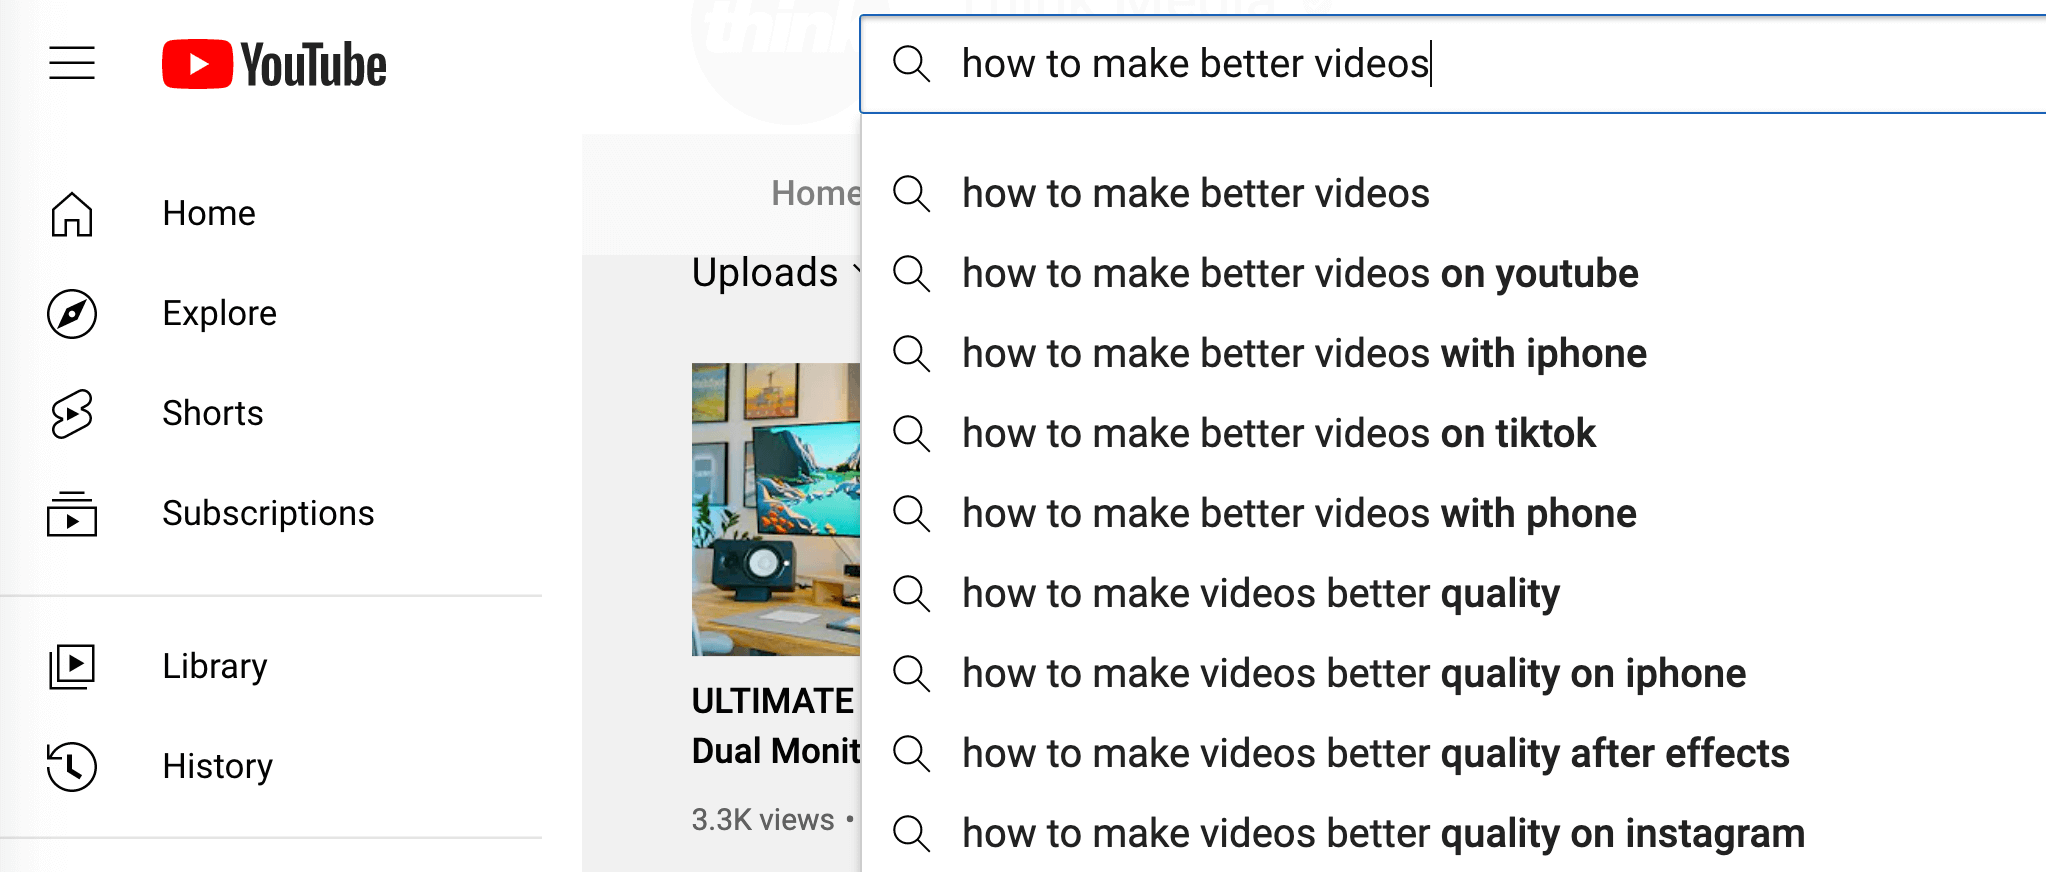 image of YouTube search autosuggestions